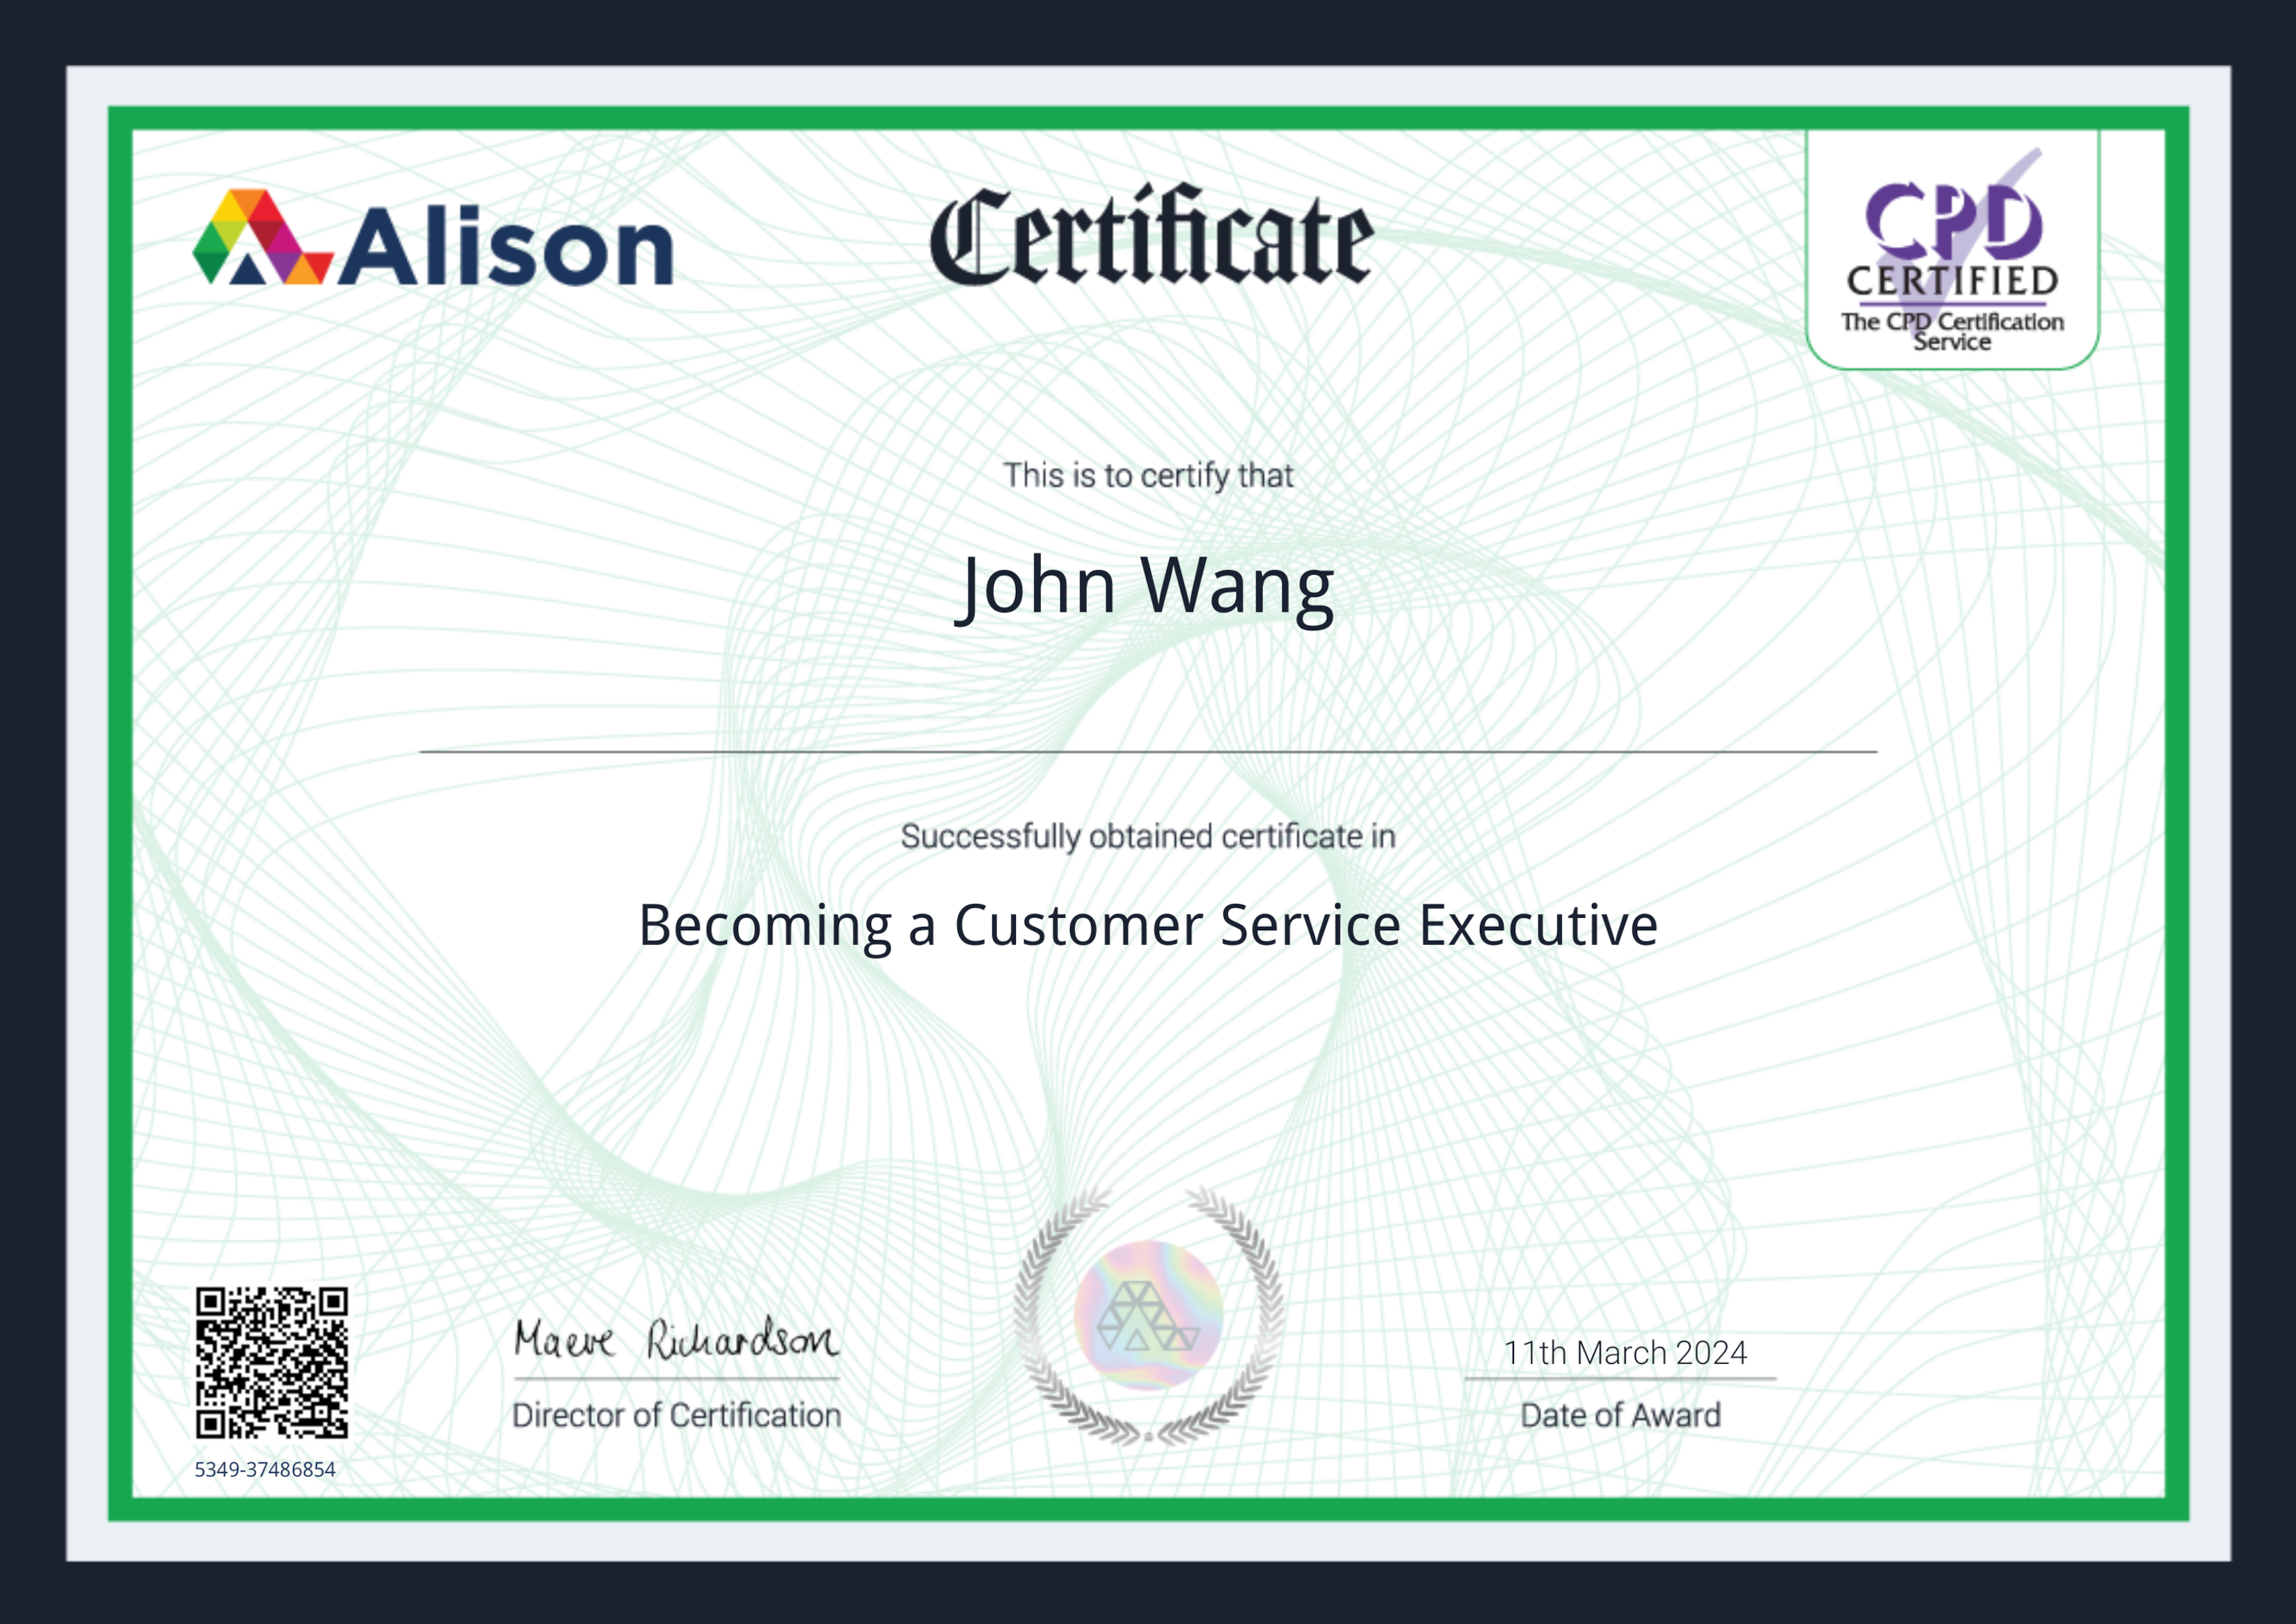 John's Becoming a Customer Service Executive from Alison by Janets